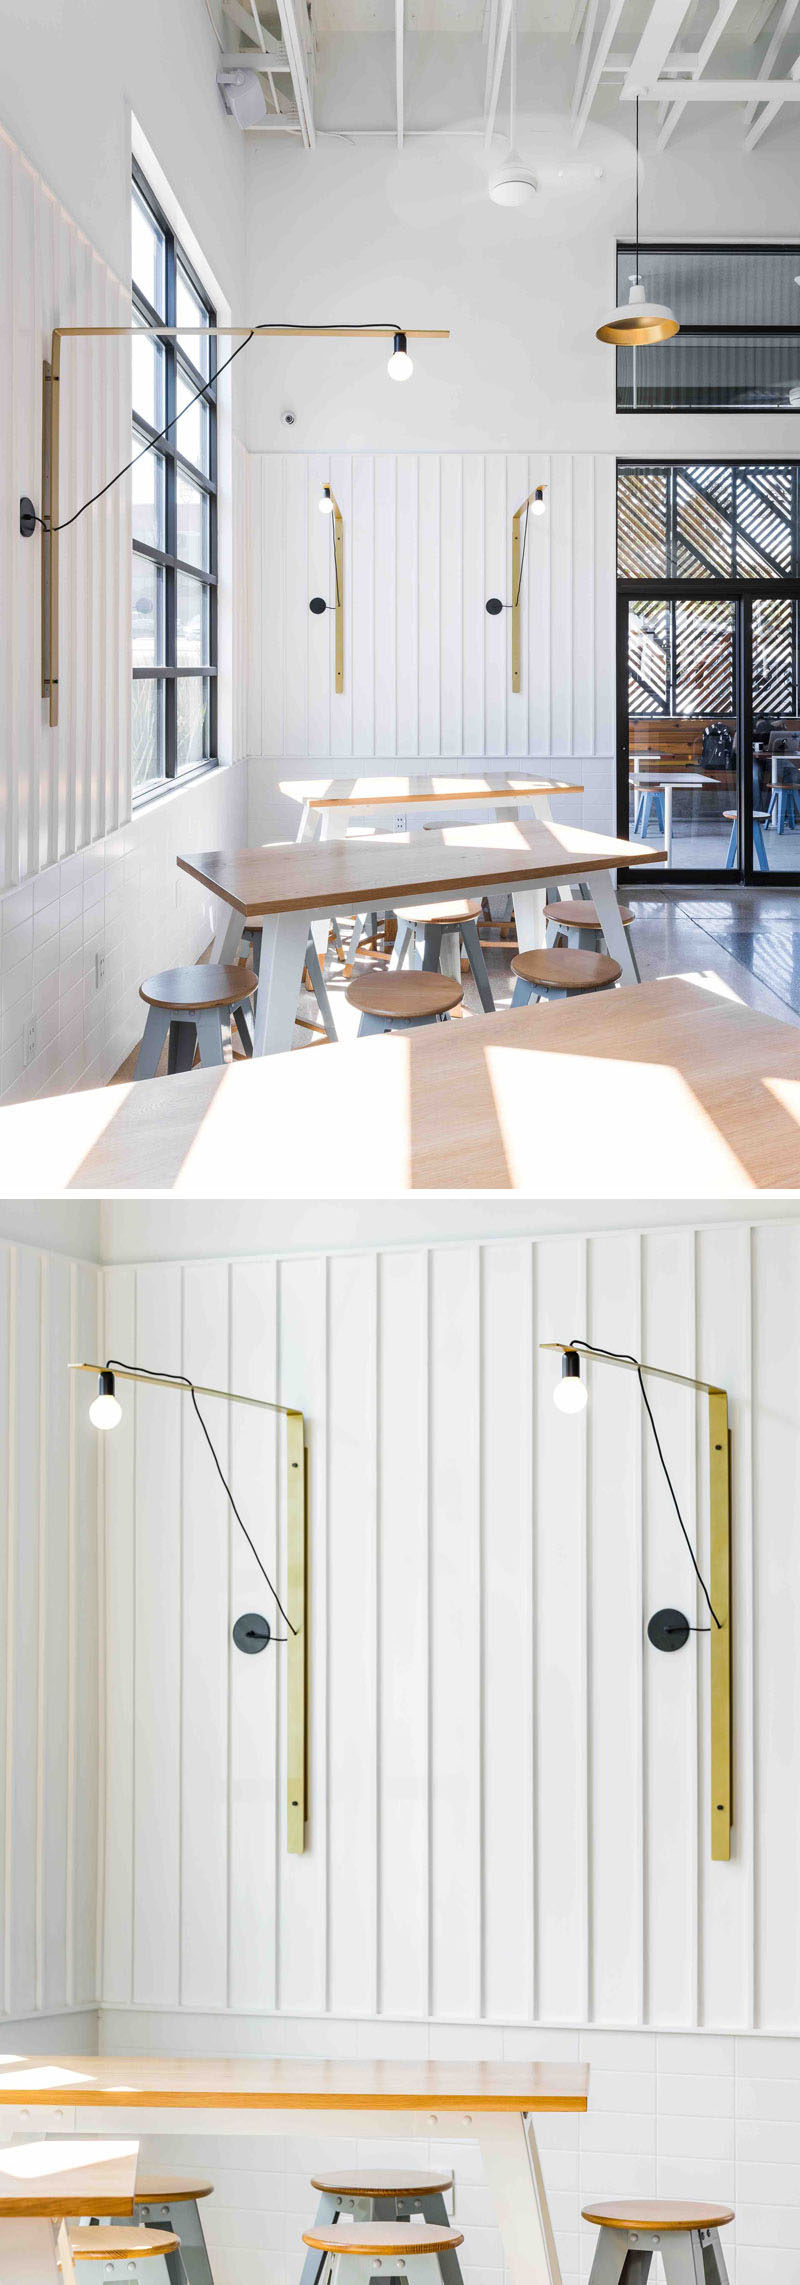 In this modern coffee shop, bar height tables and stools are positioned by the window, with simple metallic gold light fixtures adorning the walls.